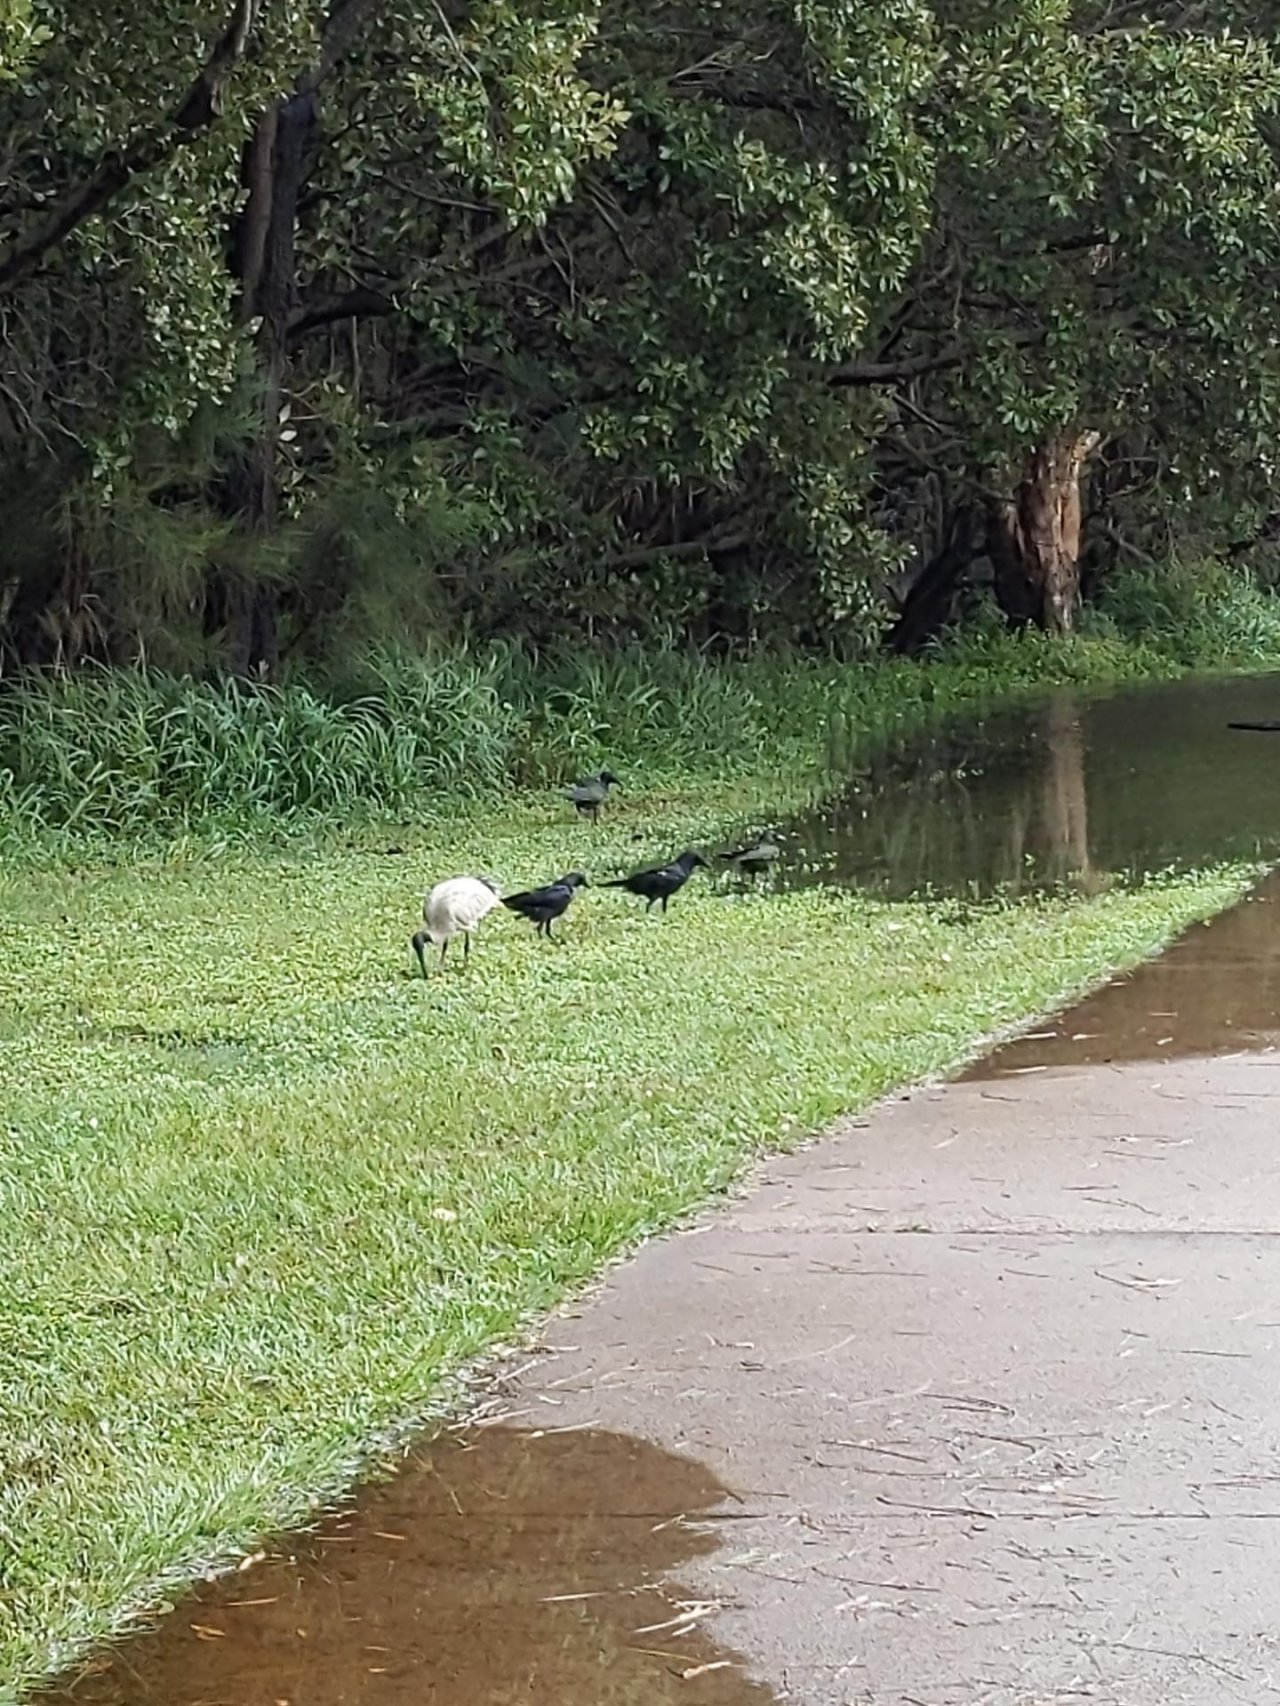 White Ibis in Big City Birds App spotted by Mitch1990 on 14.12.2020